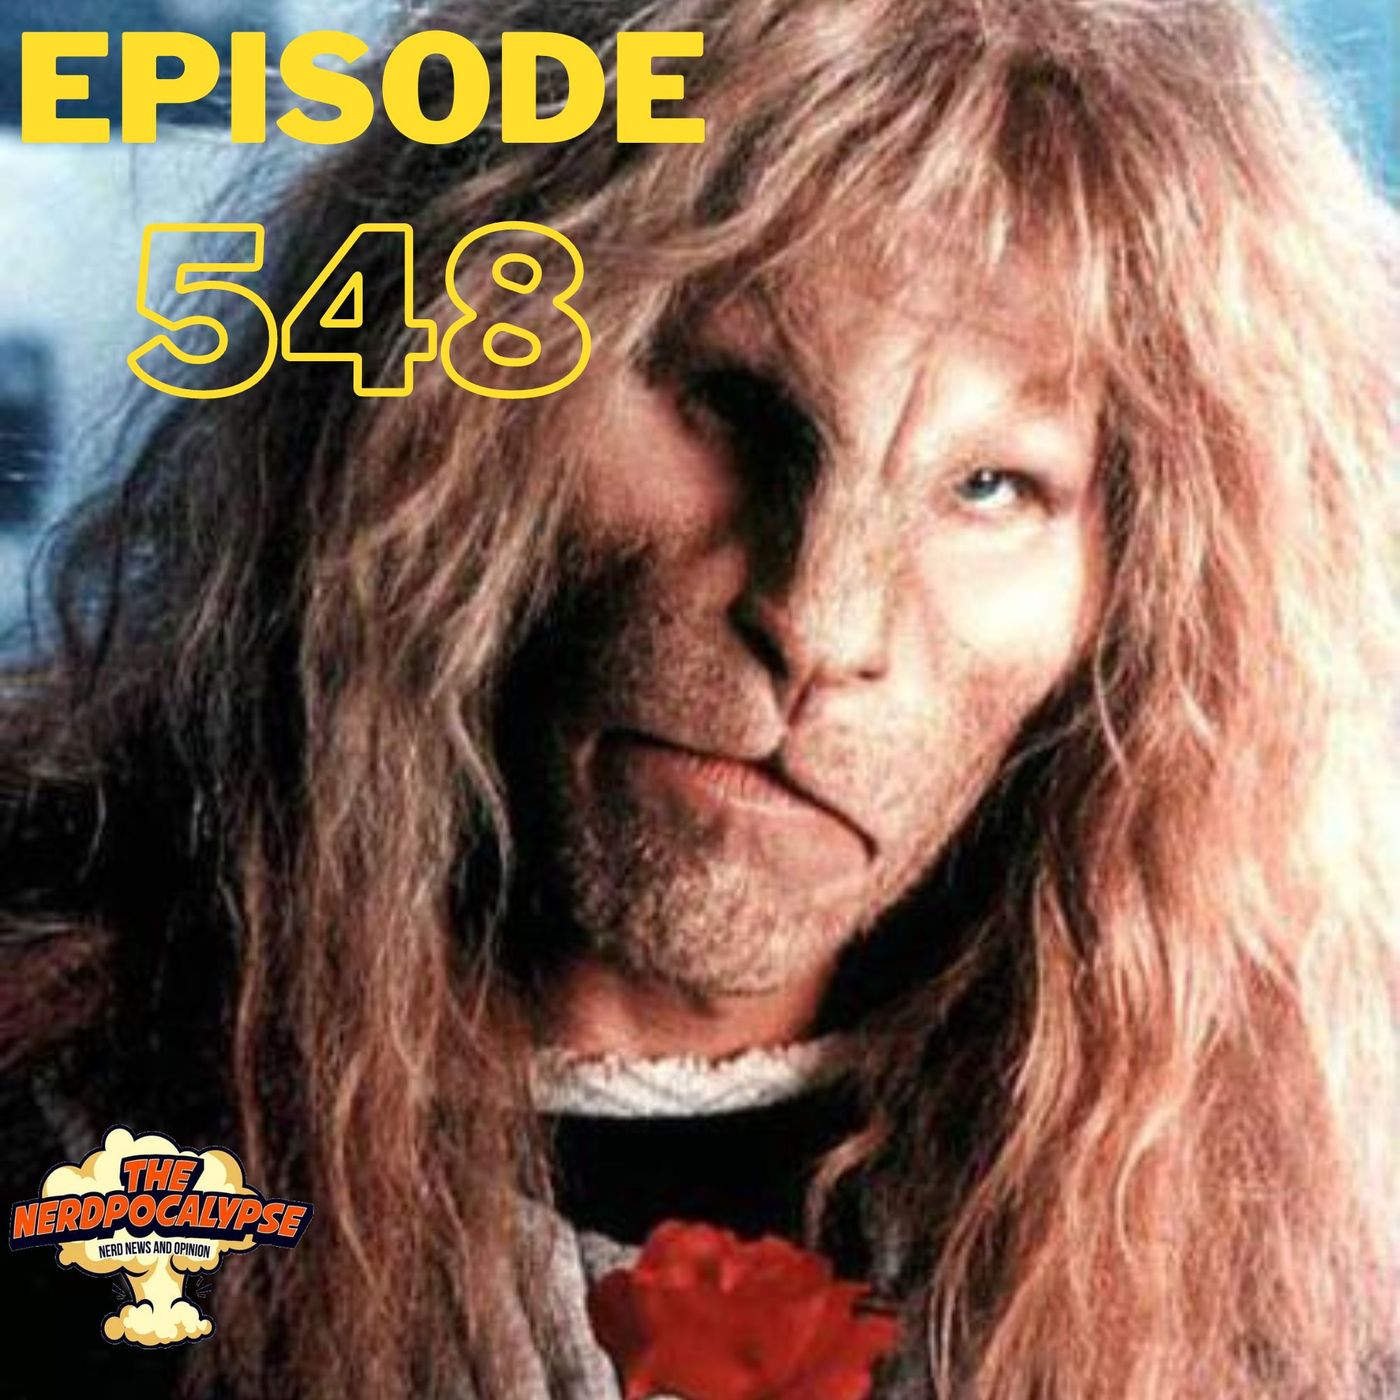 Episode 548: The Inspirational Face of Ron Perlman